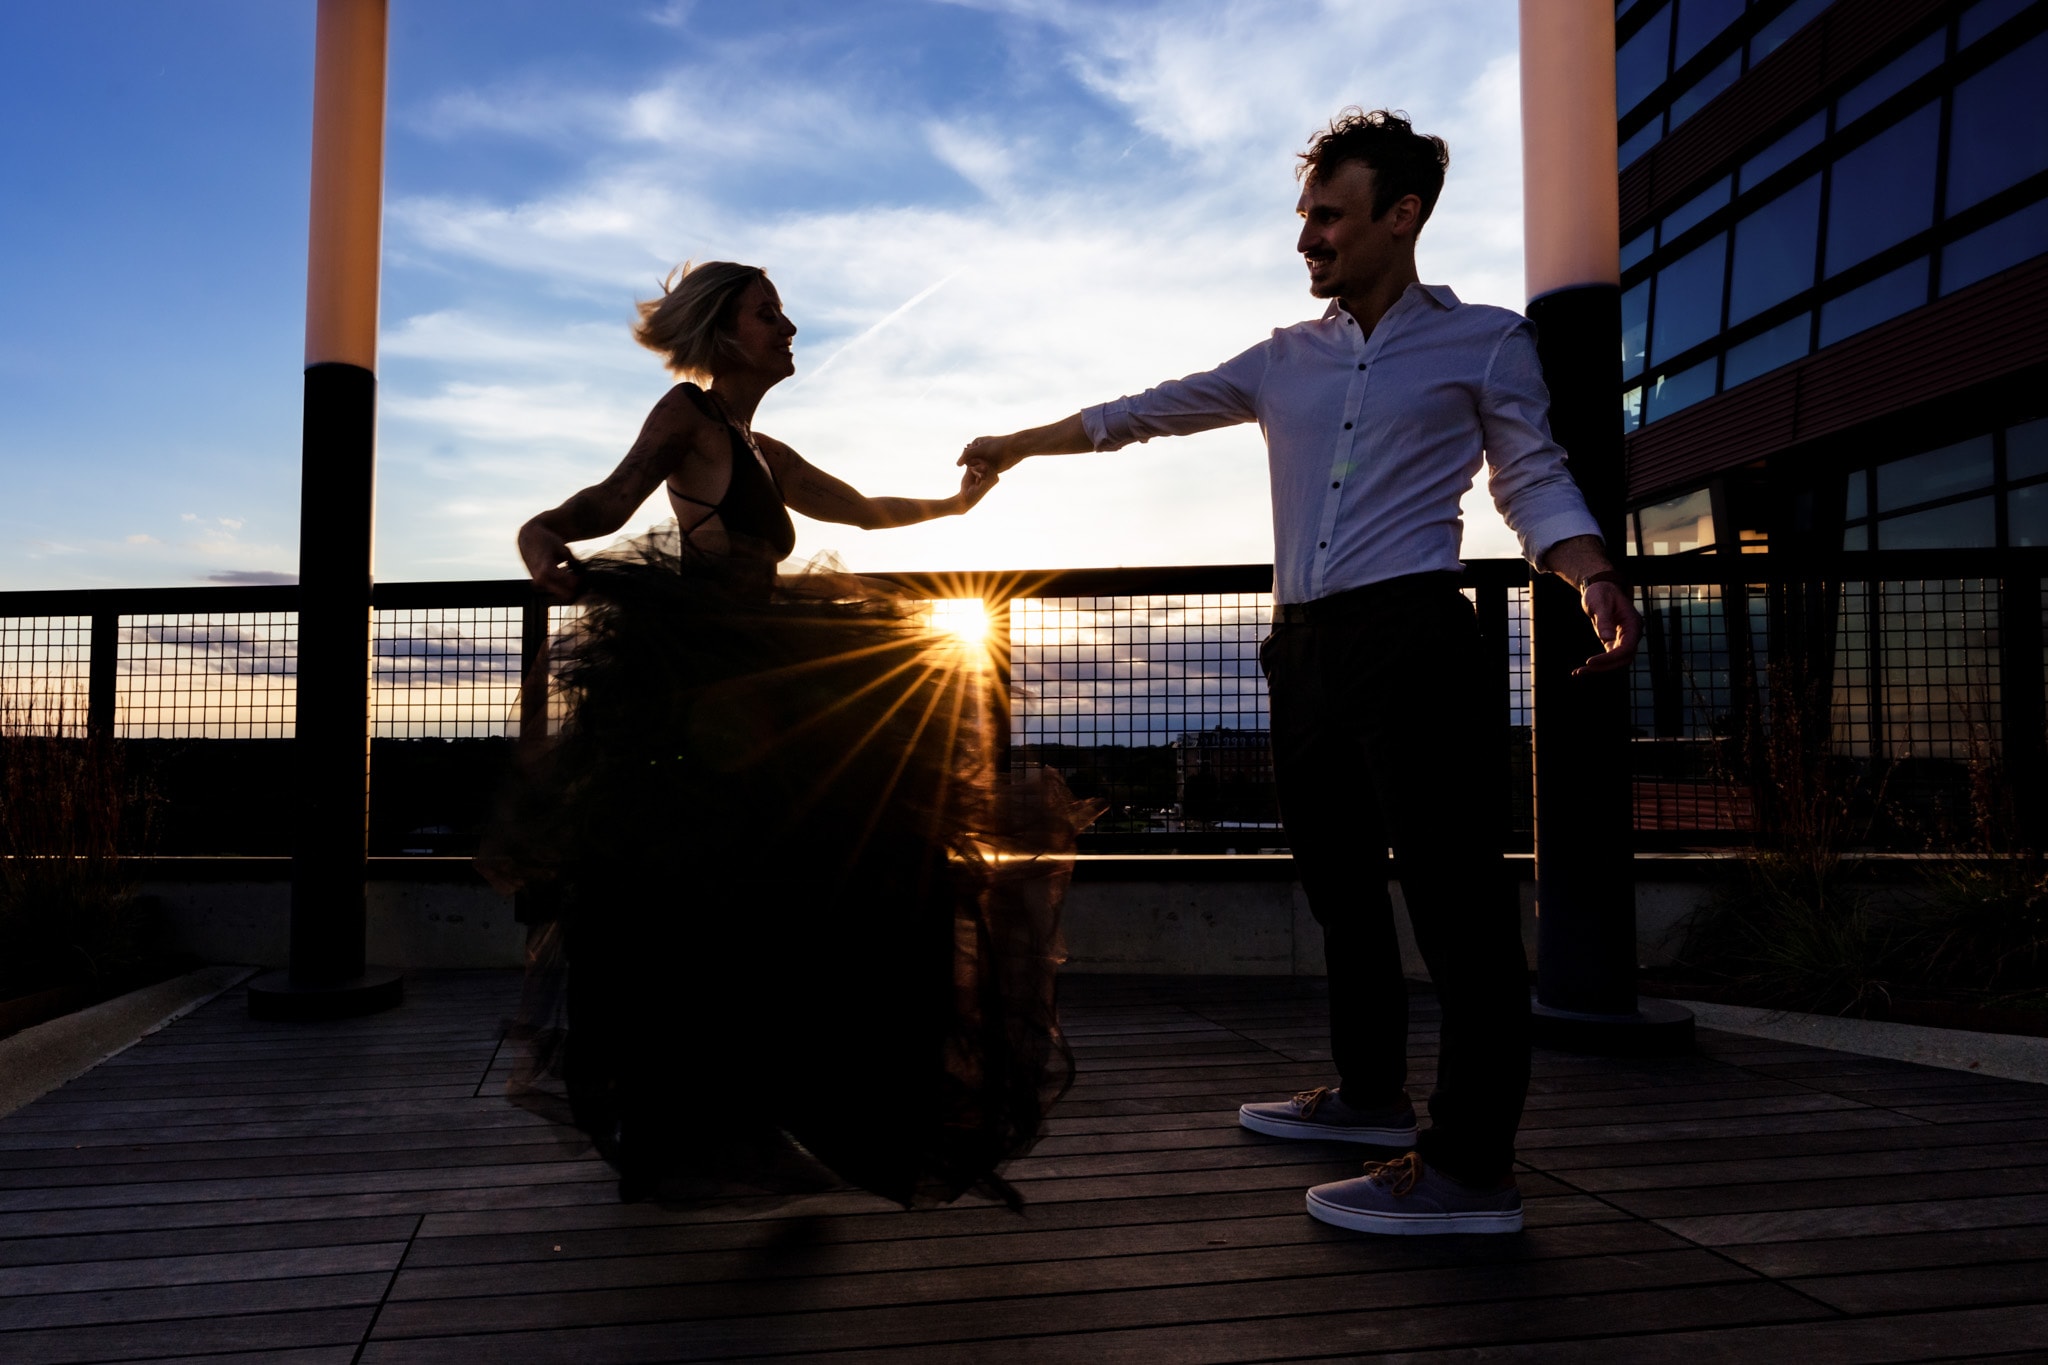 love a good silhouette as part of engagement or wedding photos | photos by Kivus & Camera